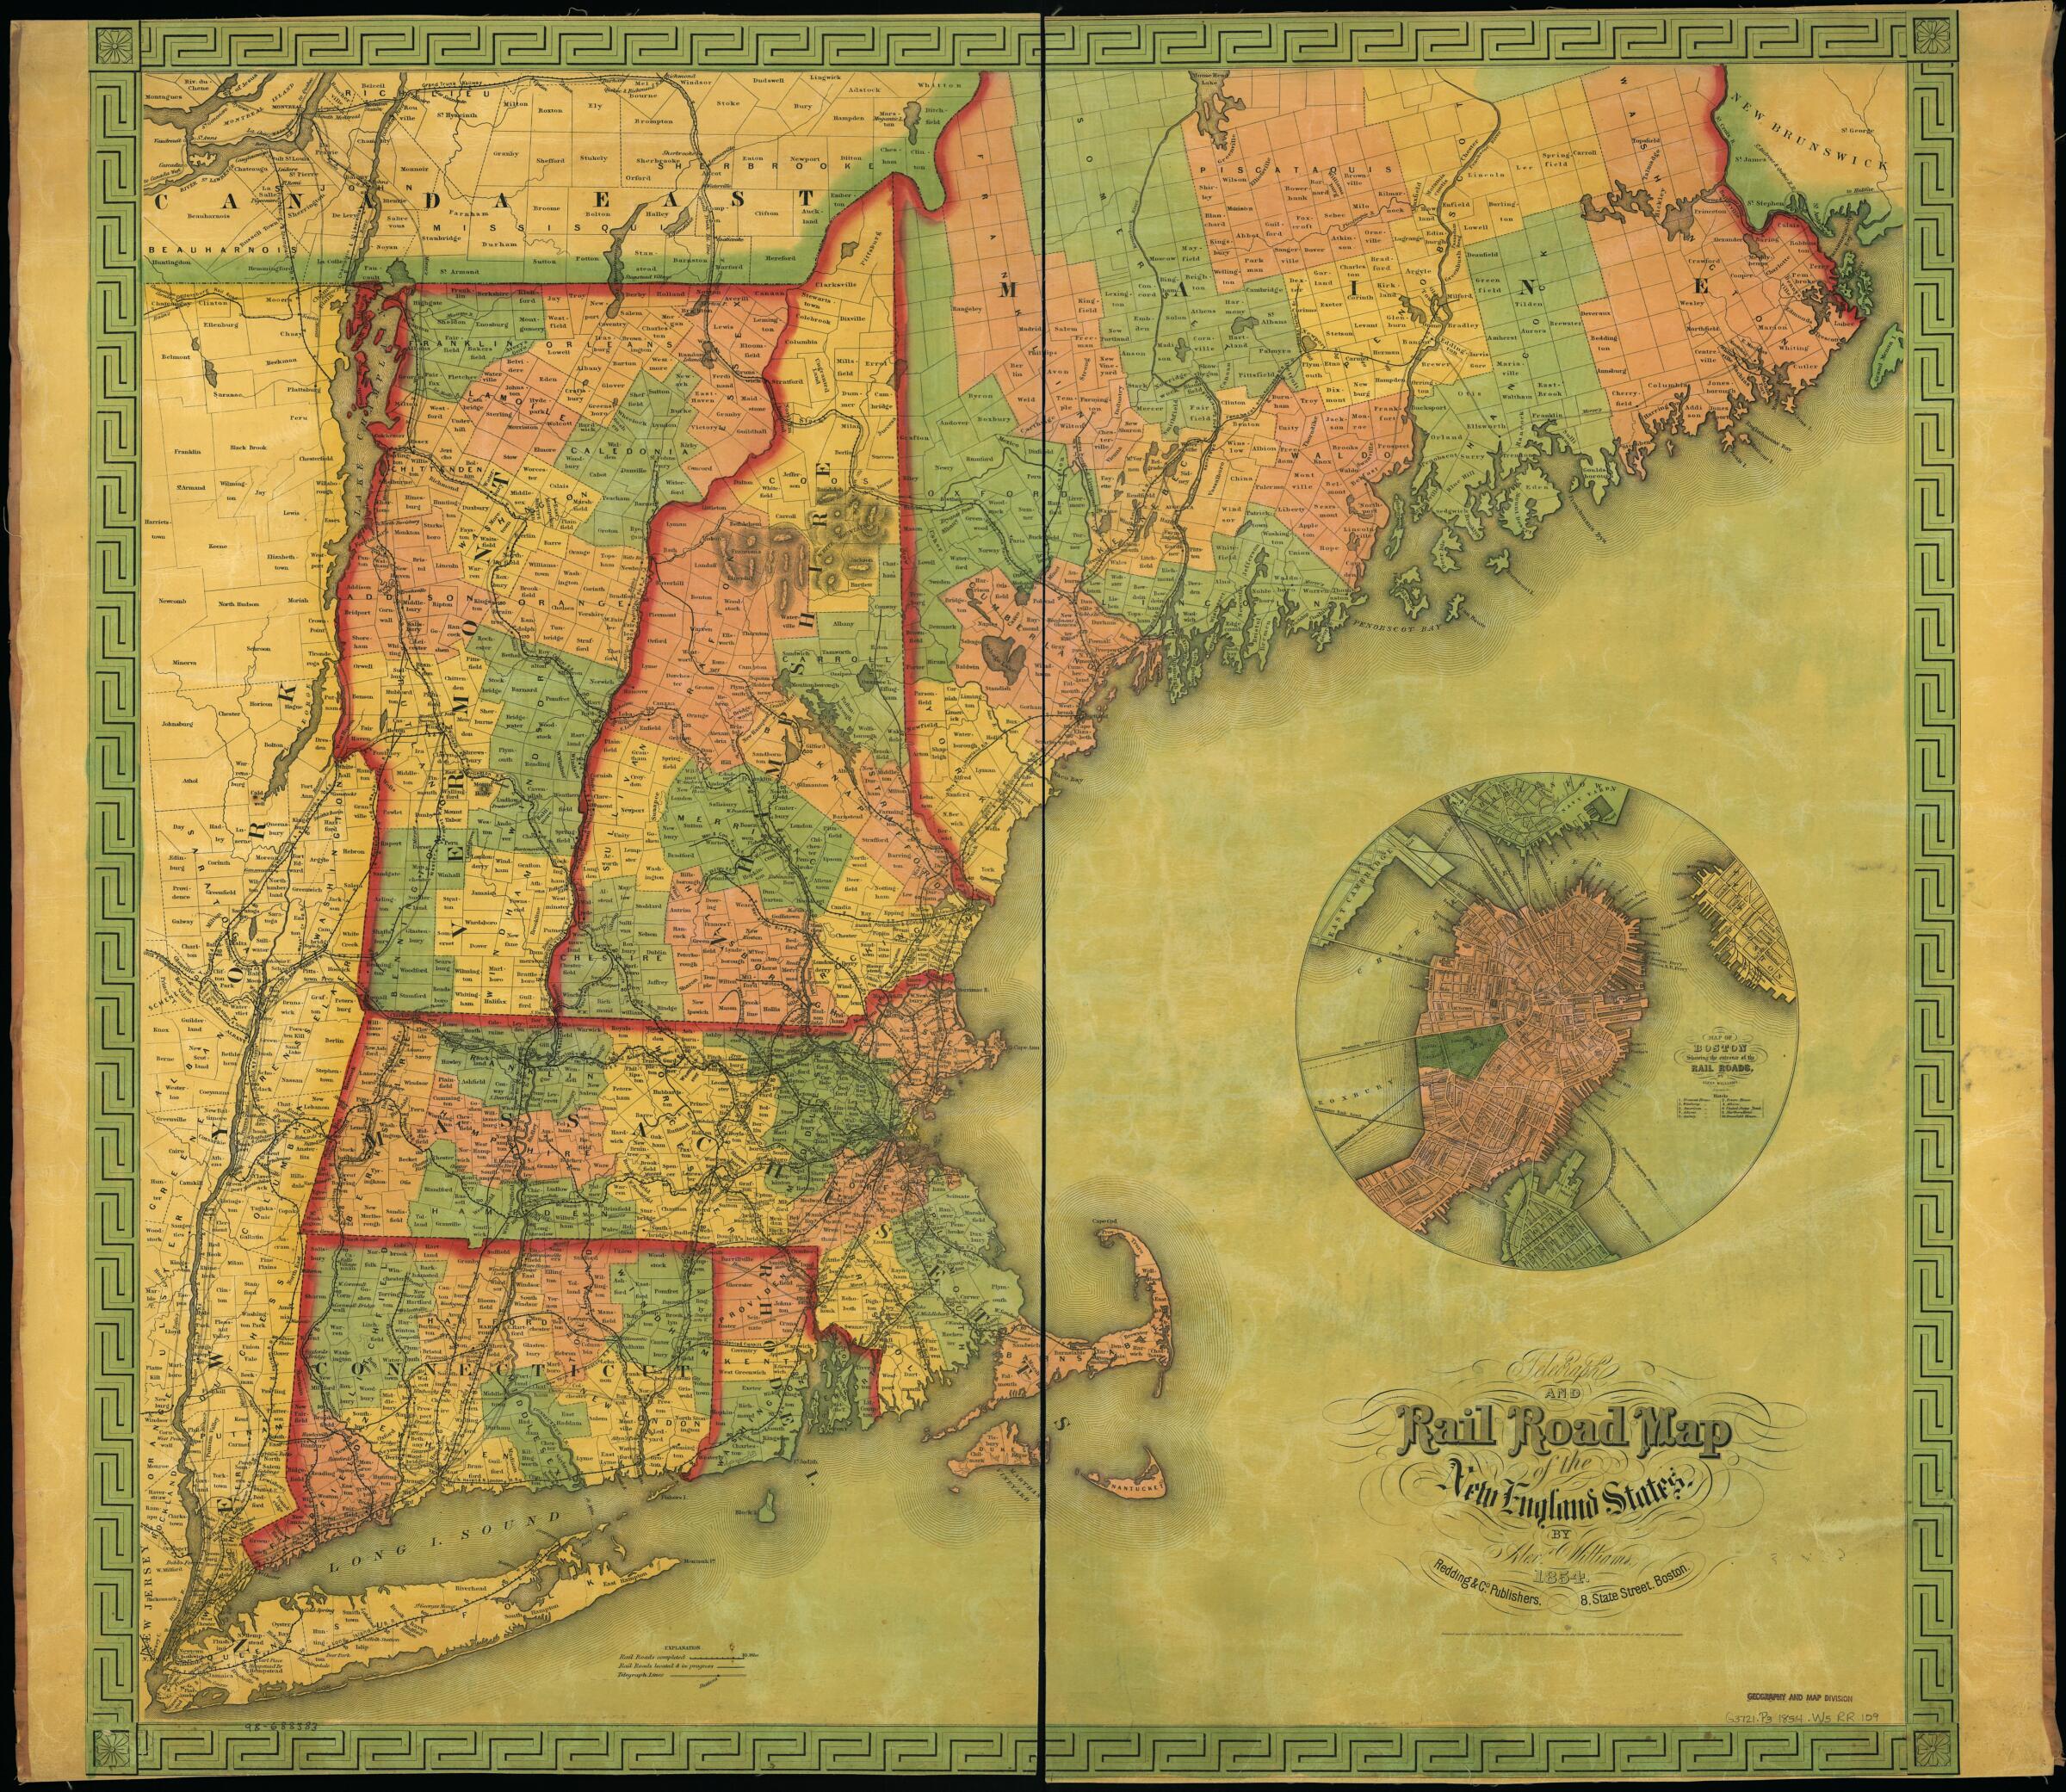 This old map of Telegraph and Rail Road Map of the New England States from 1854 was created by Alexander Williams in 1854